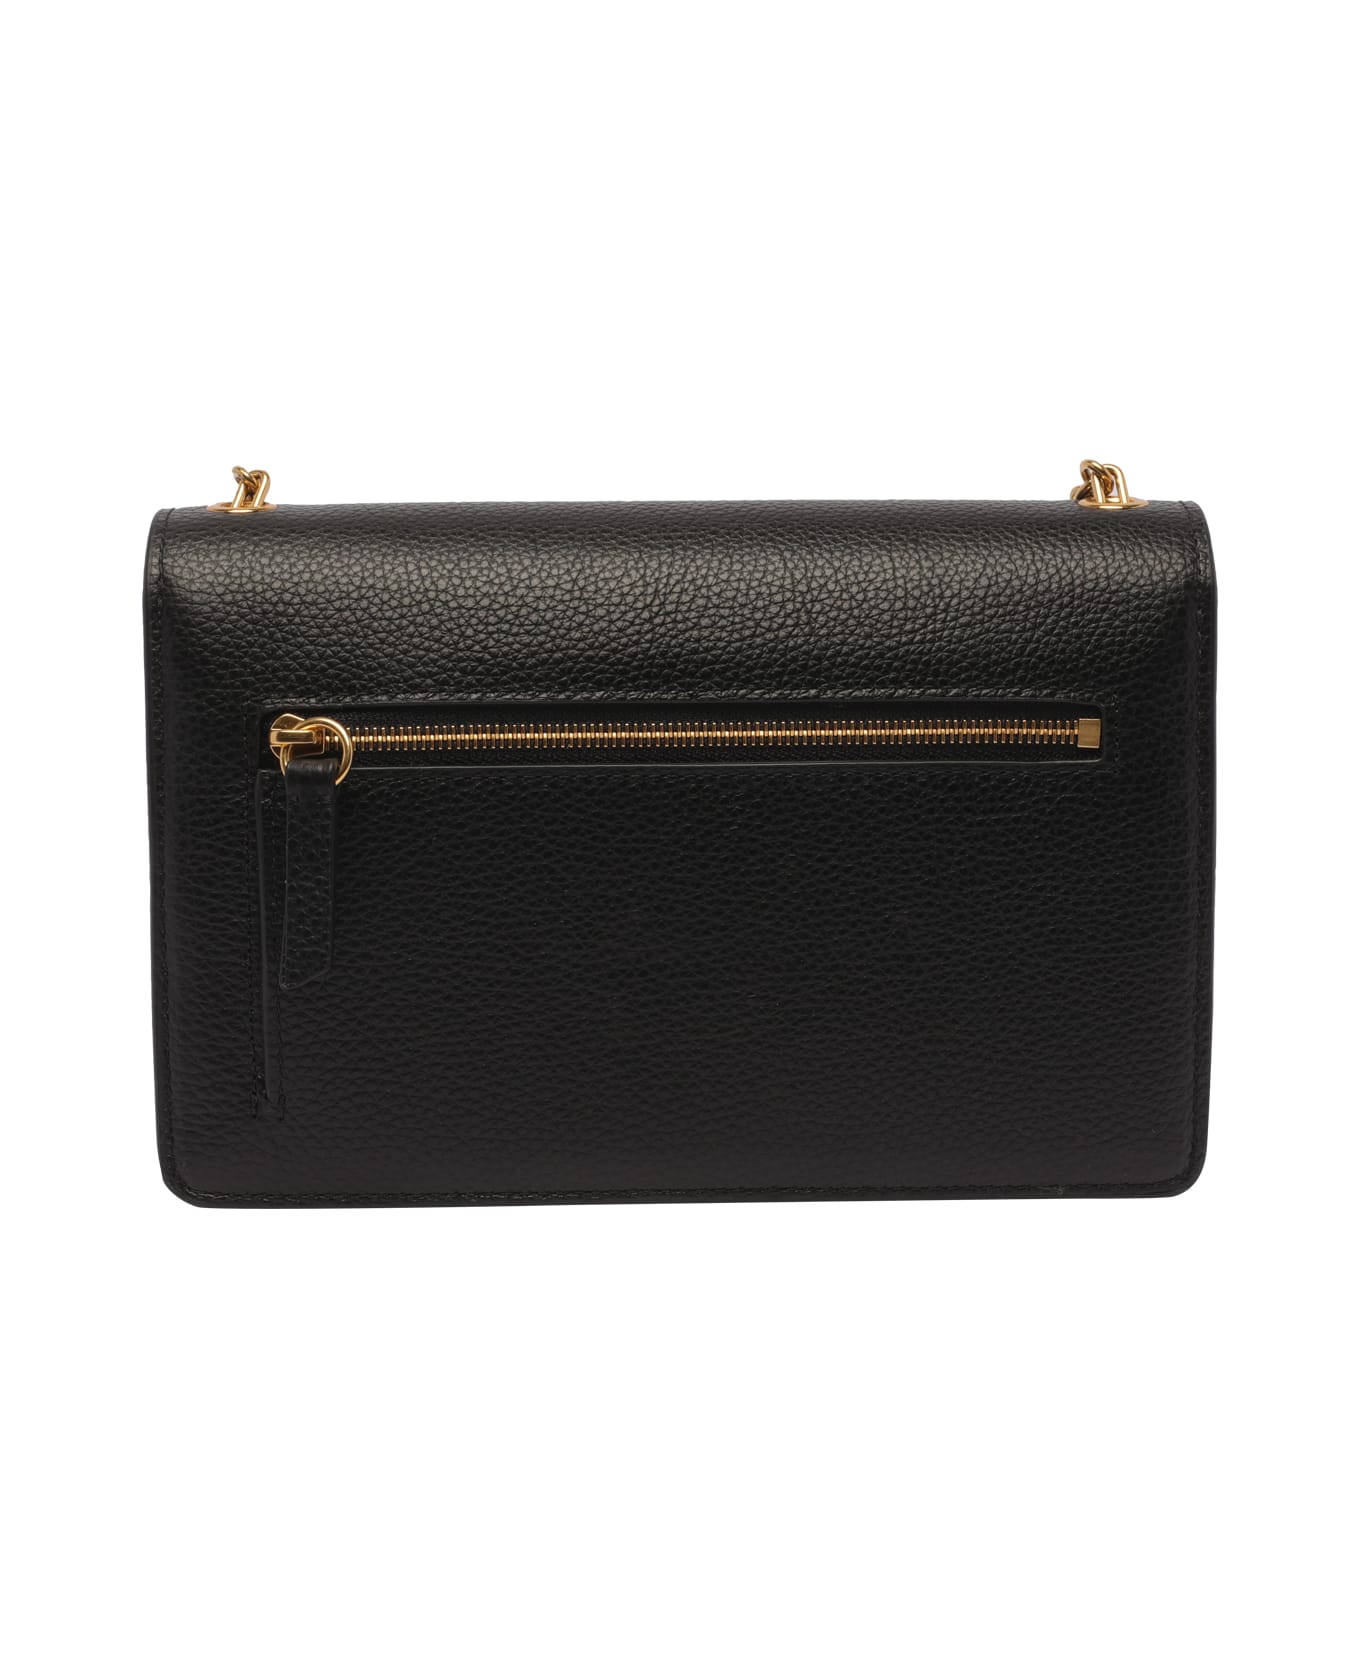 Mulberry Darley Classic Small Shoulder Bag - Black